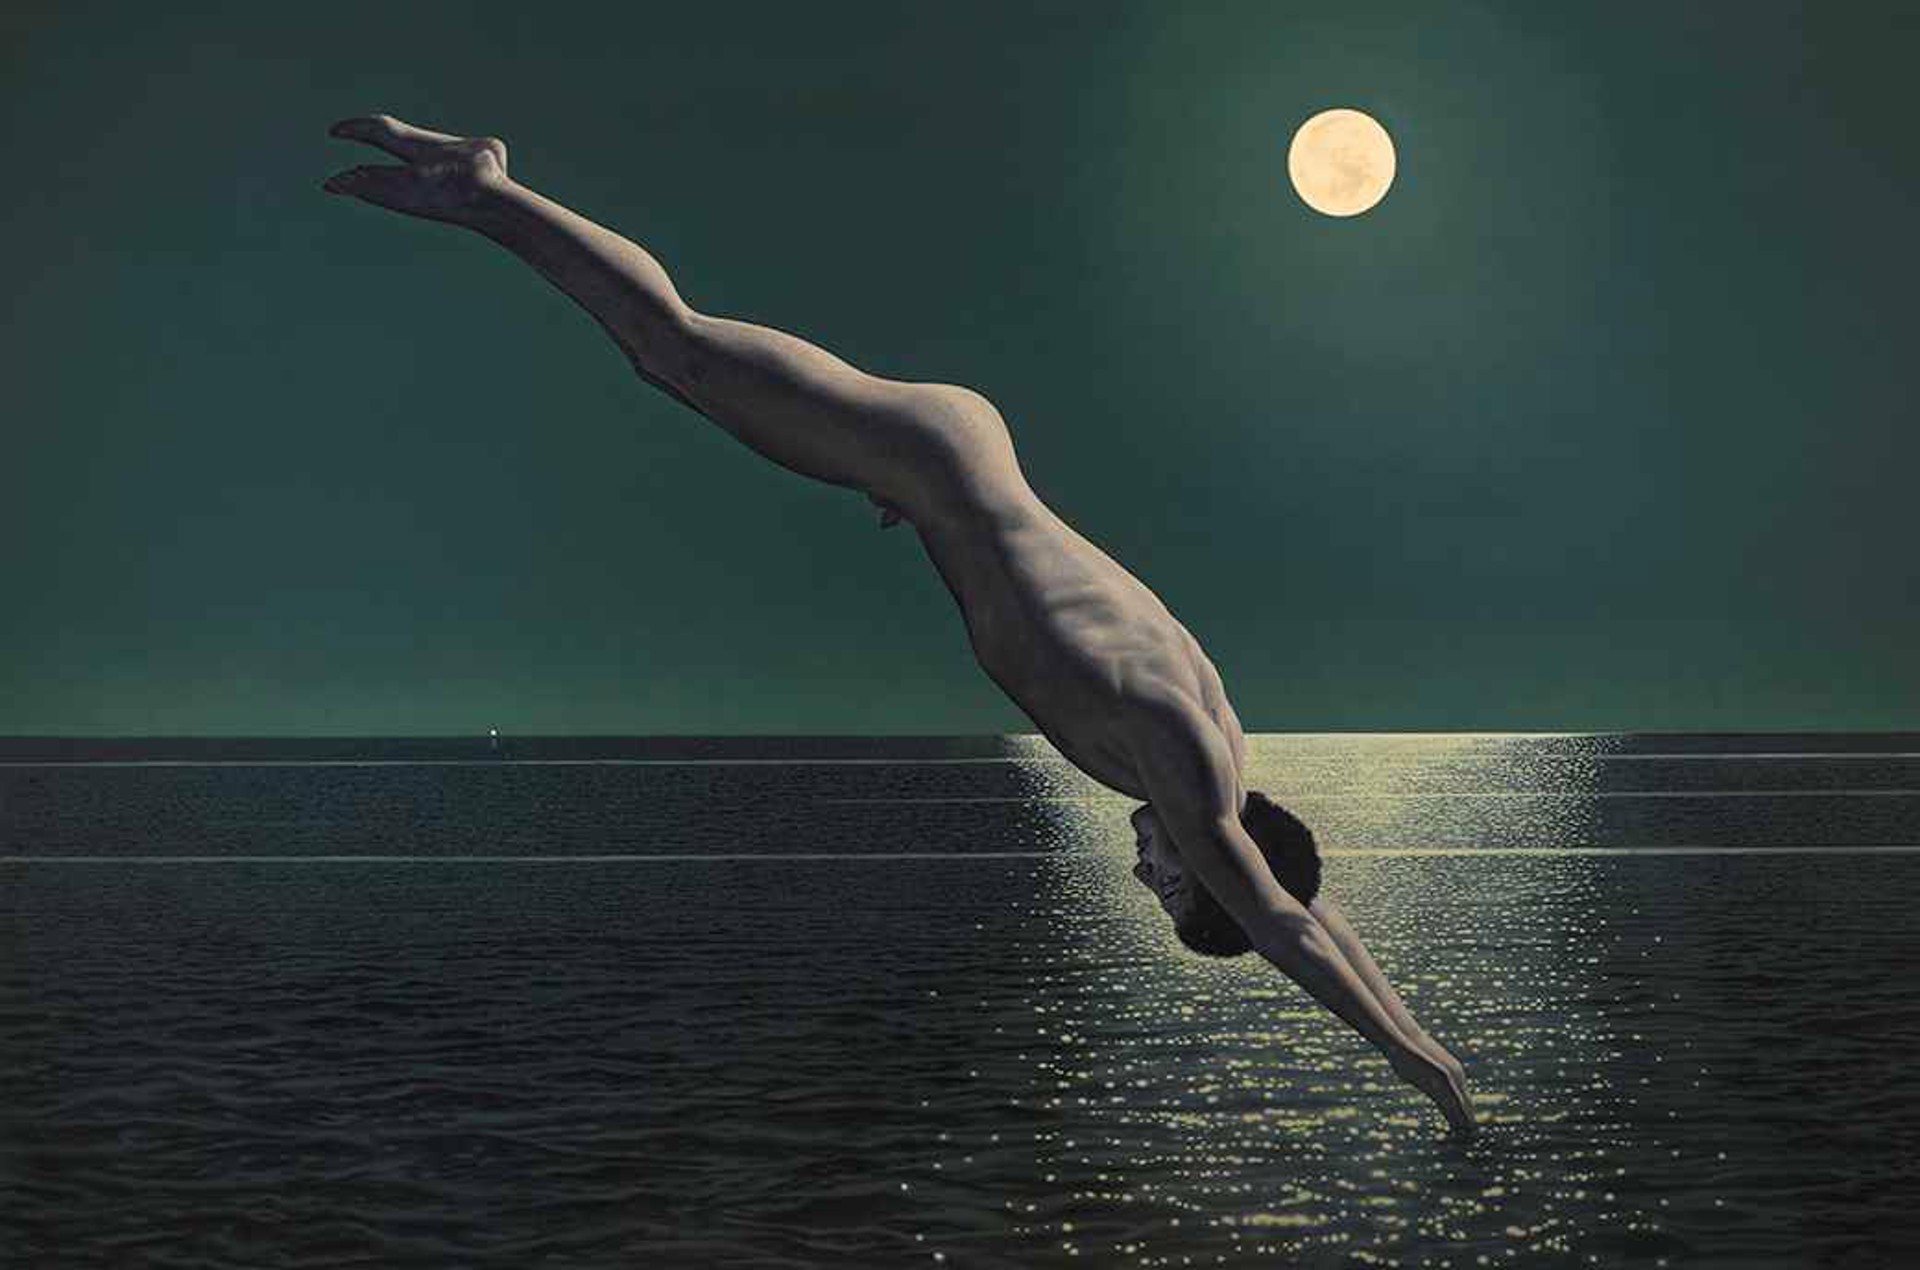 Night Diver by David Ligare